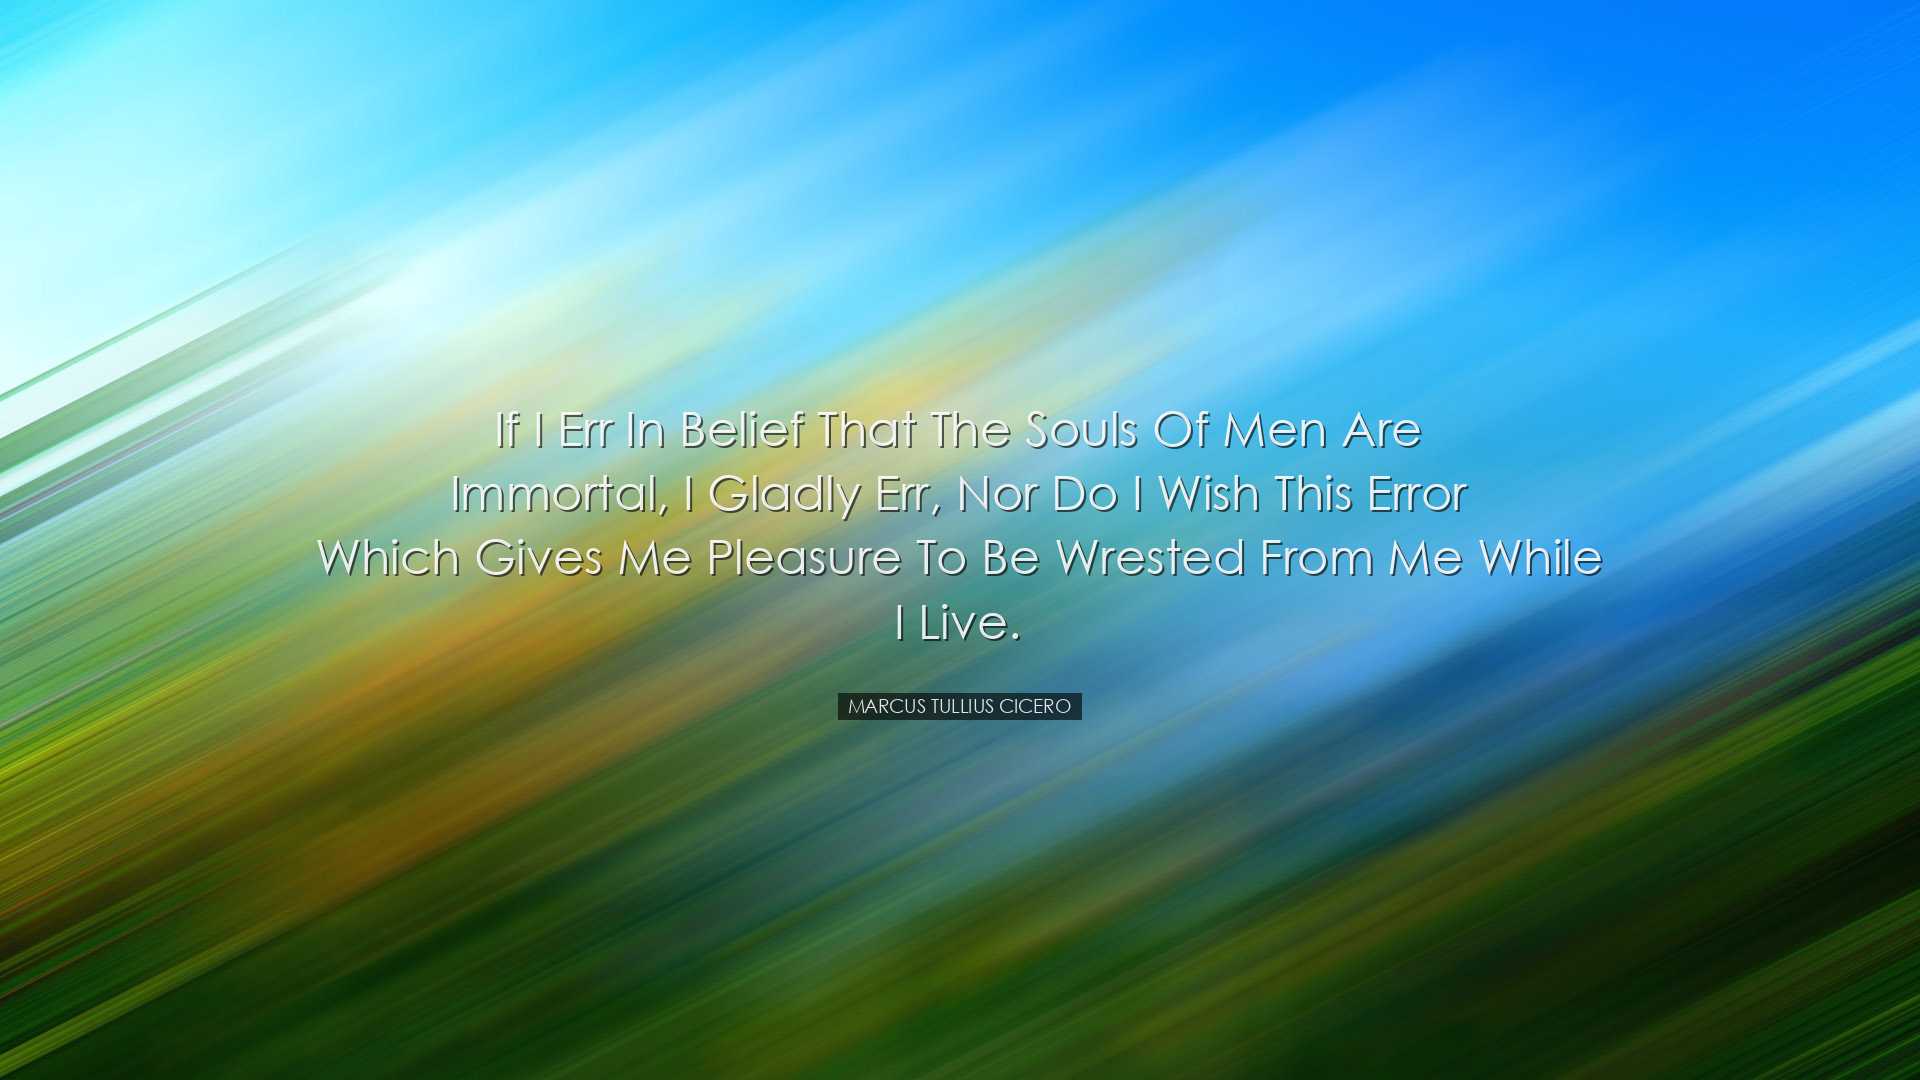 If I err in belief that the souls of men are immortal, I gladly er